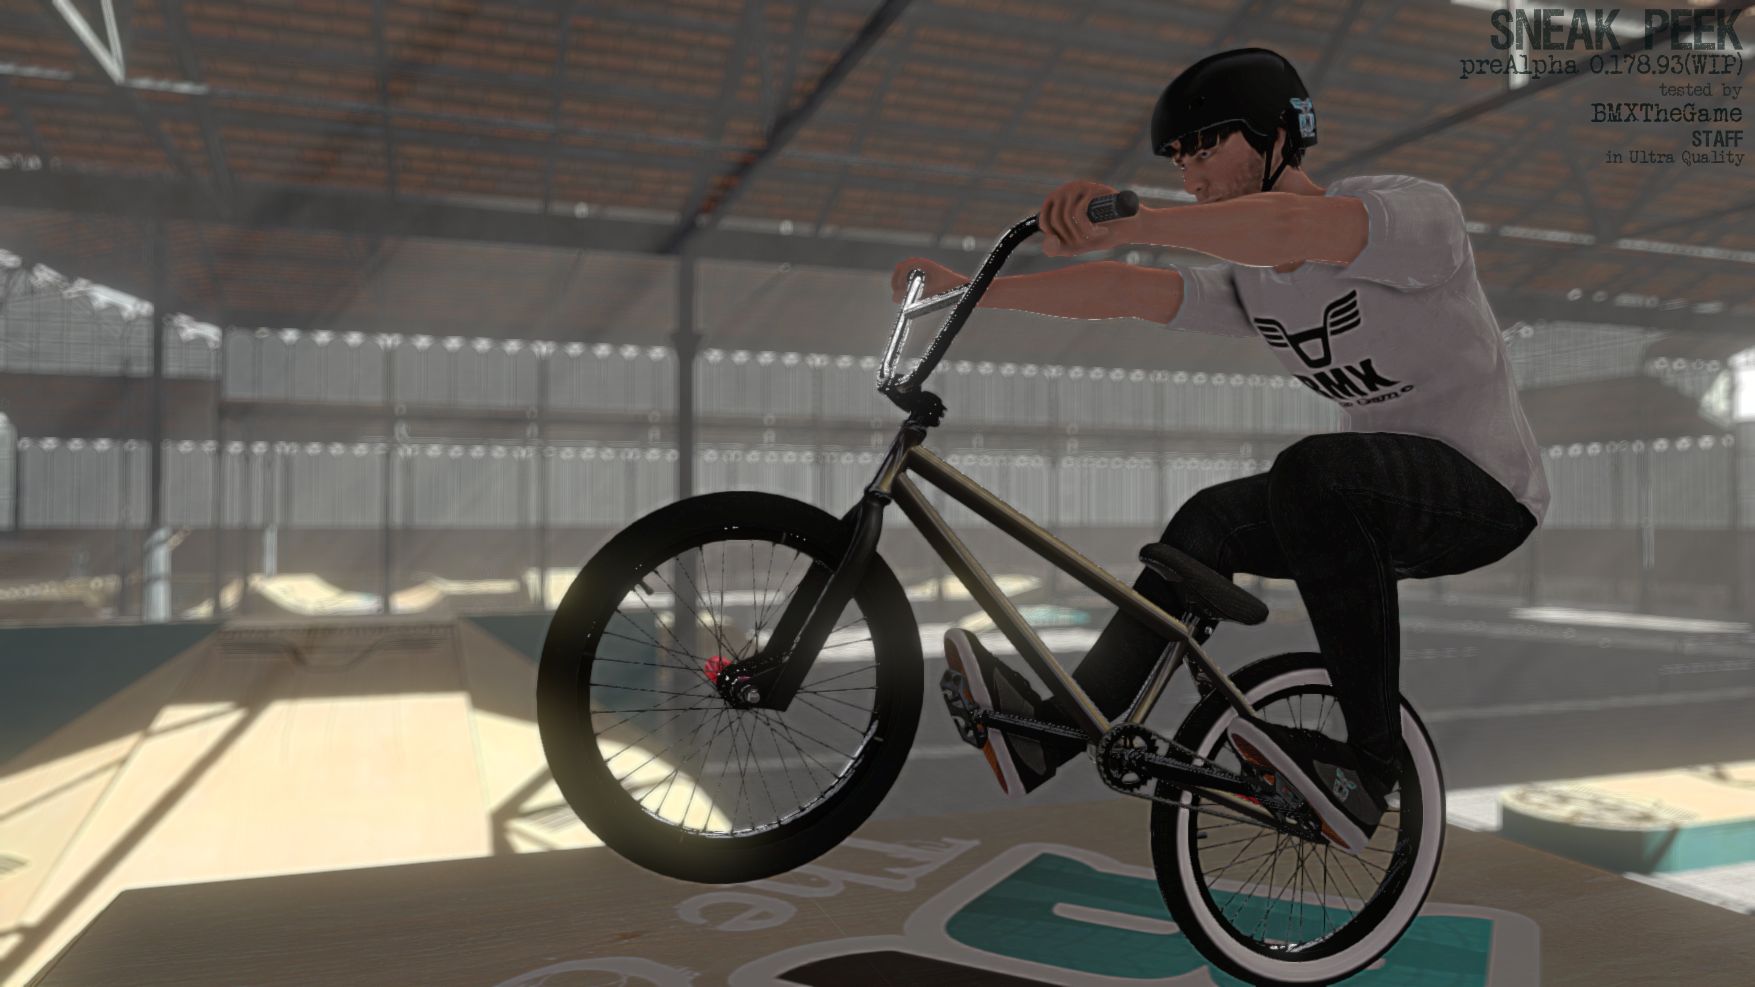 2016 Summer Video Of BMX The Game - GamingConviction.com